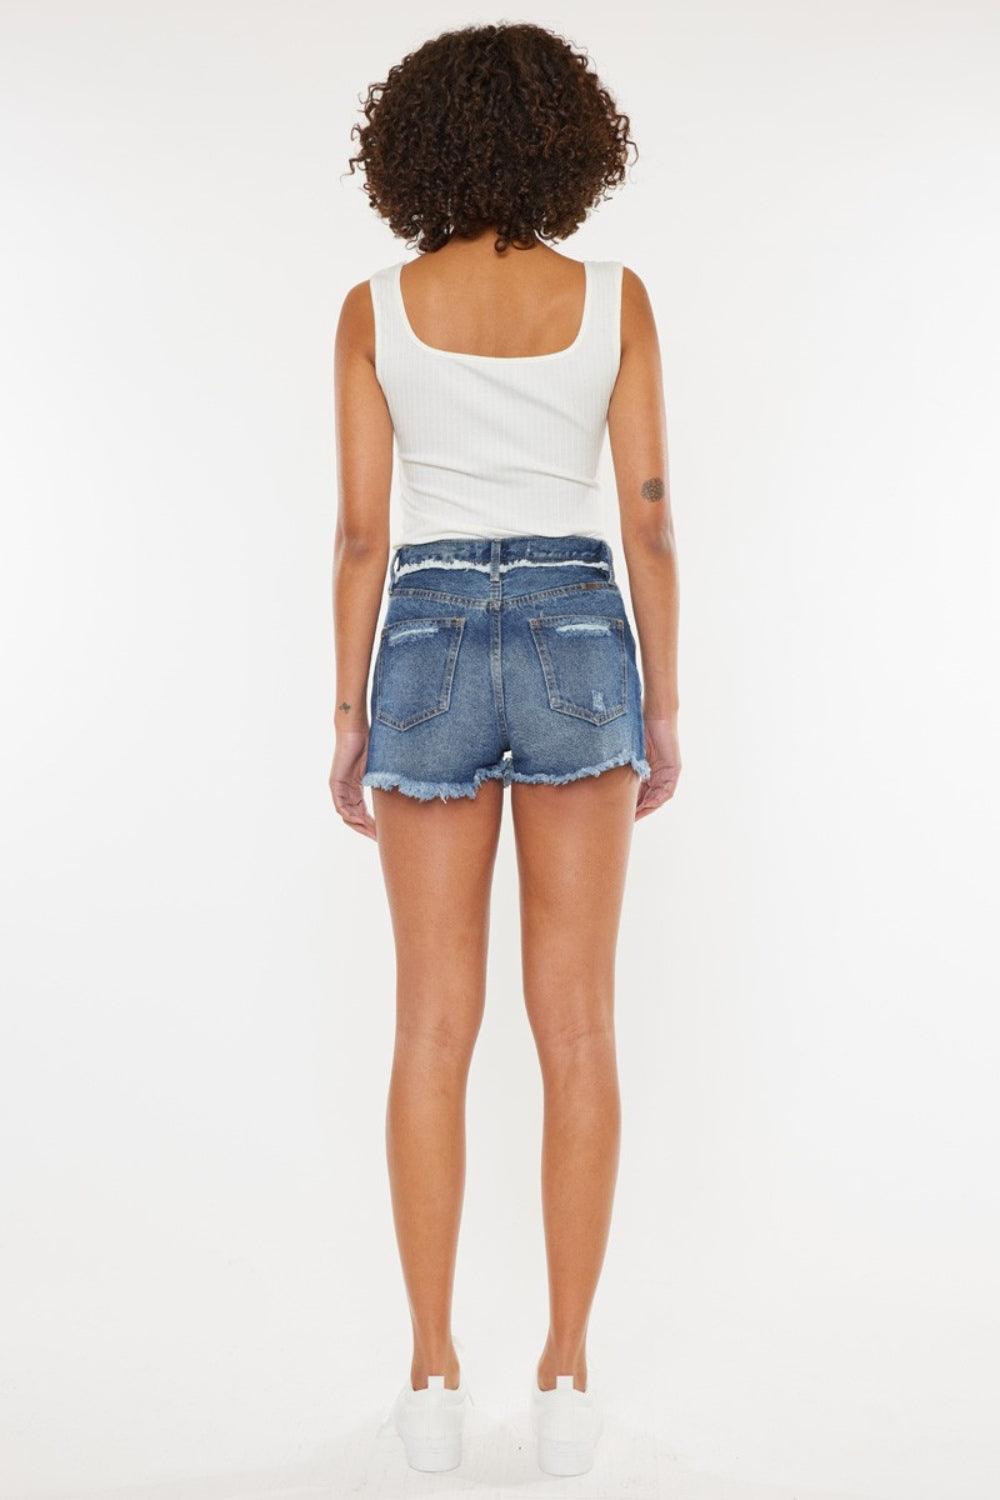 KanCan Button Fly High Rise Torn Distressed Denim Frayed Cut-Off Jean Shorts